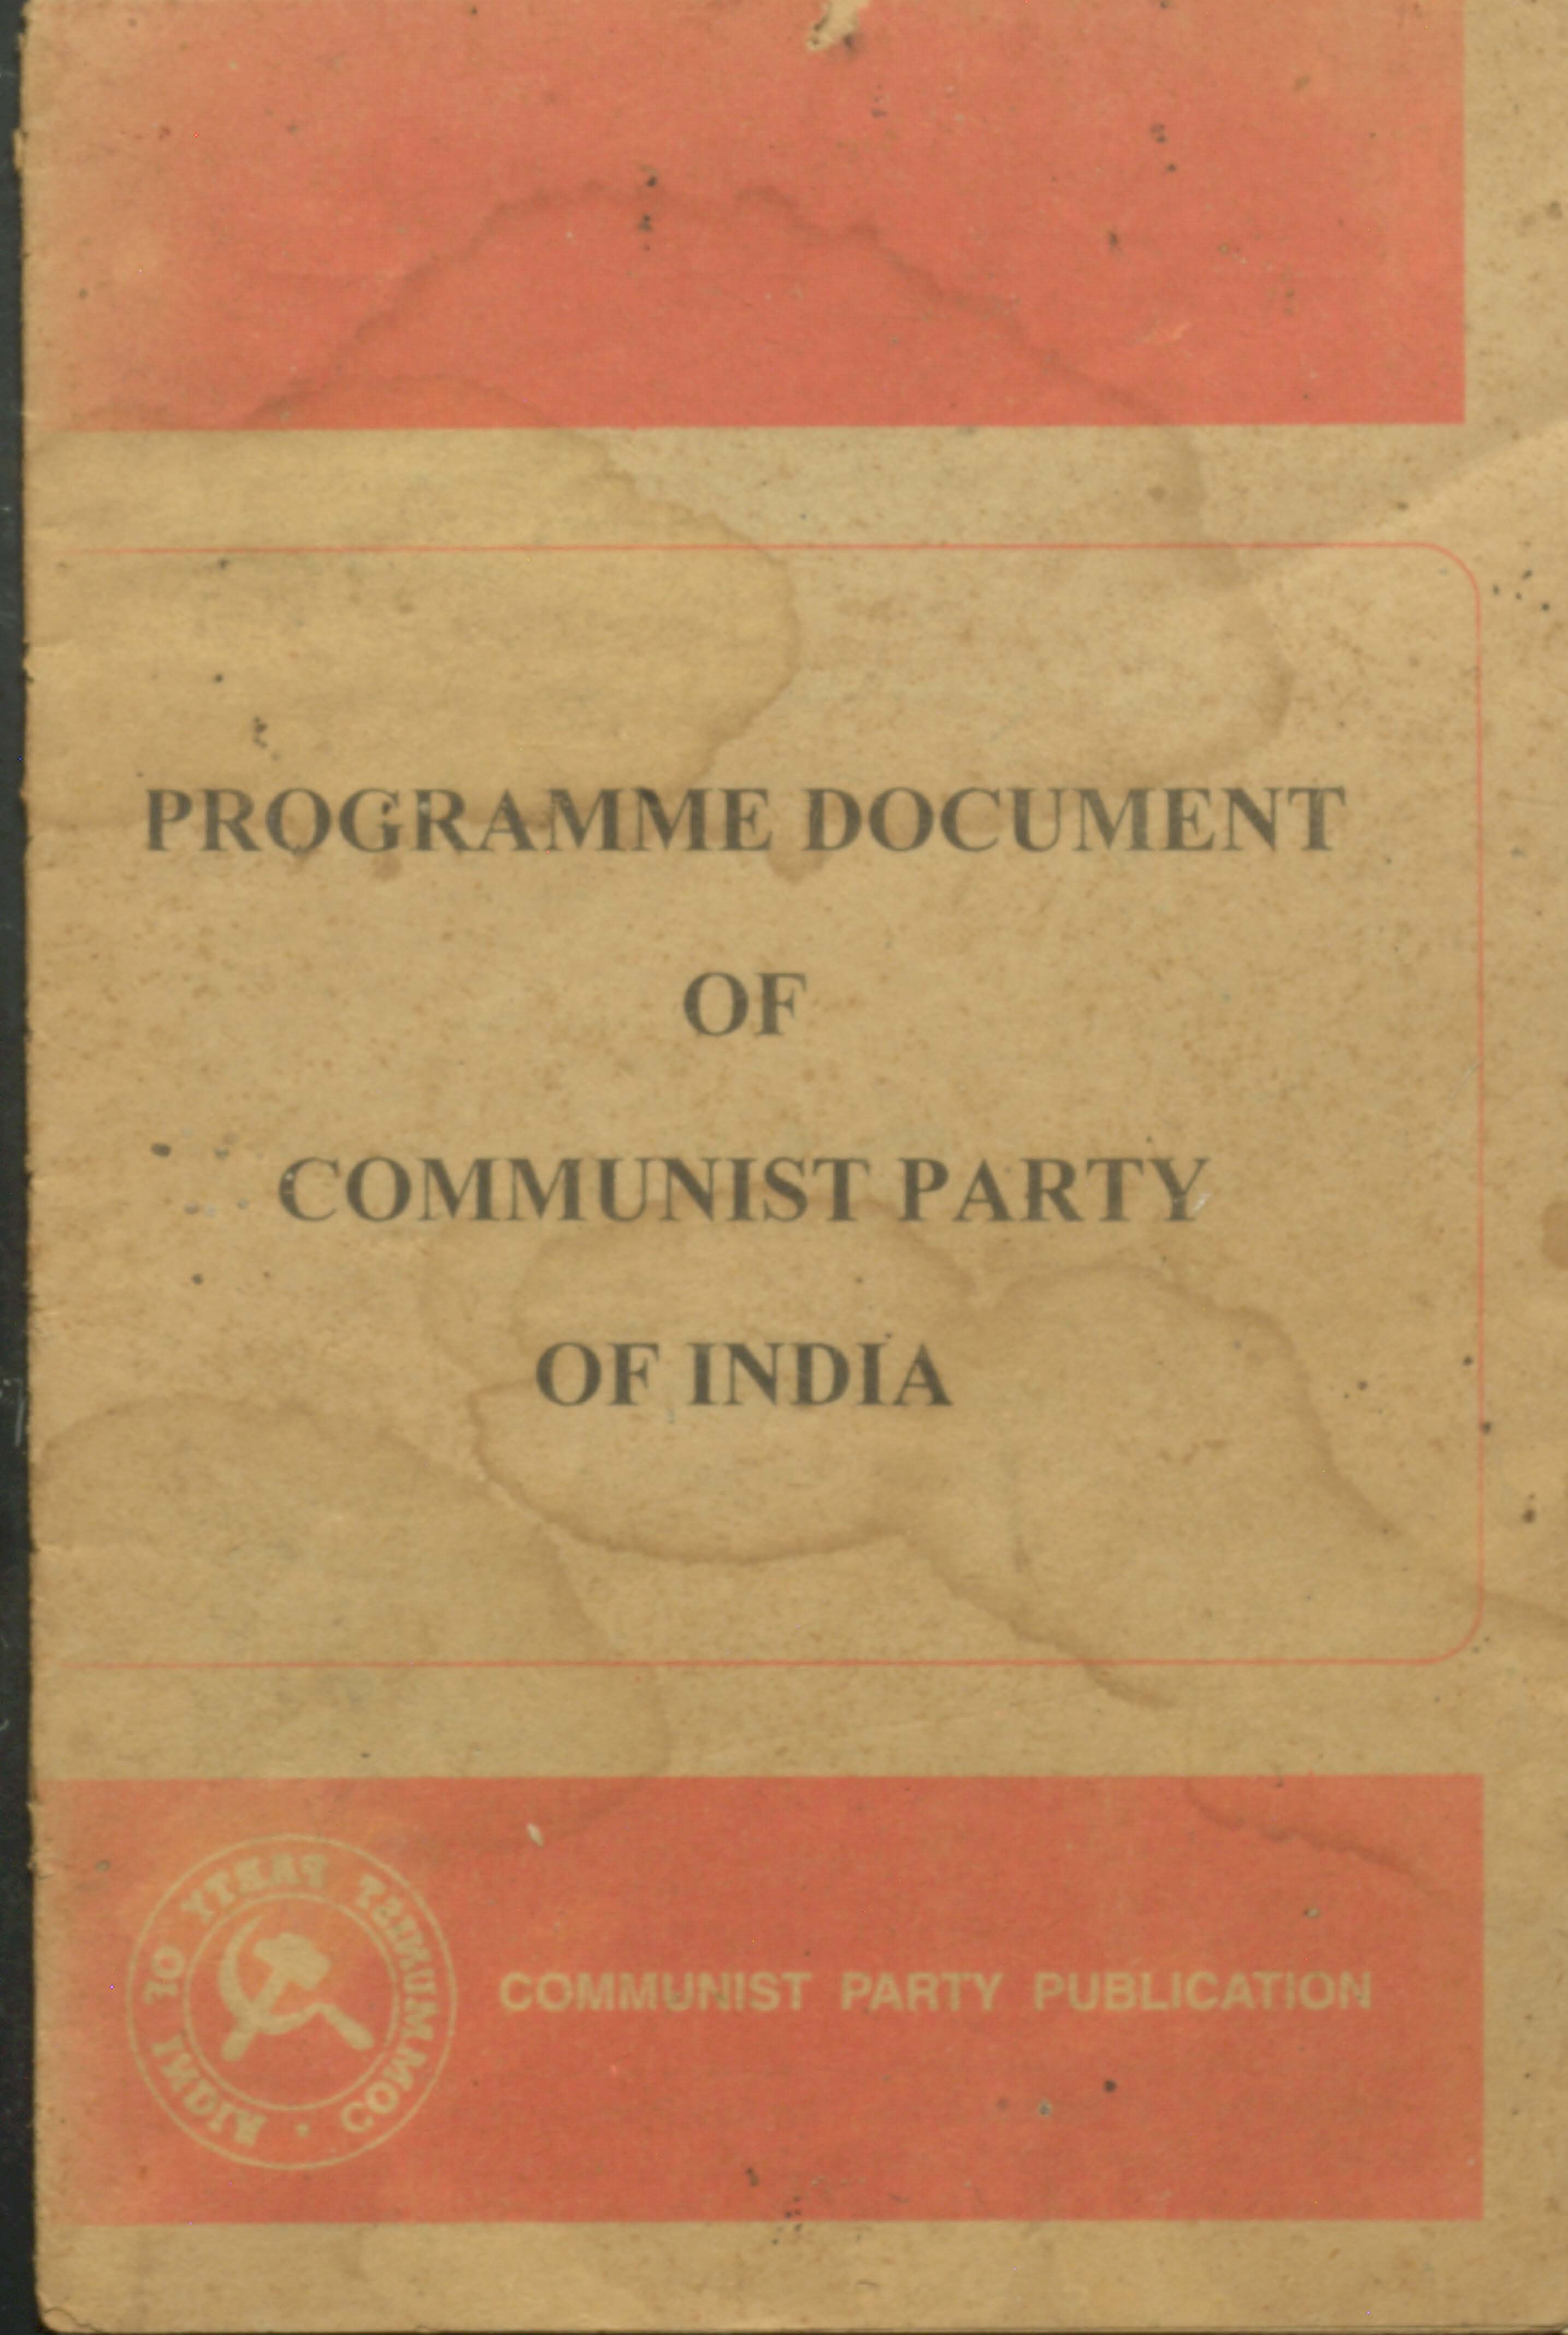 Programme document of communist party of india